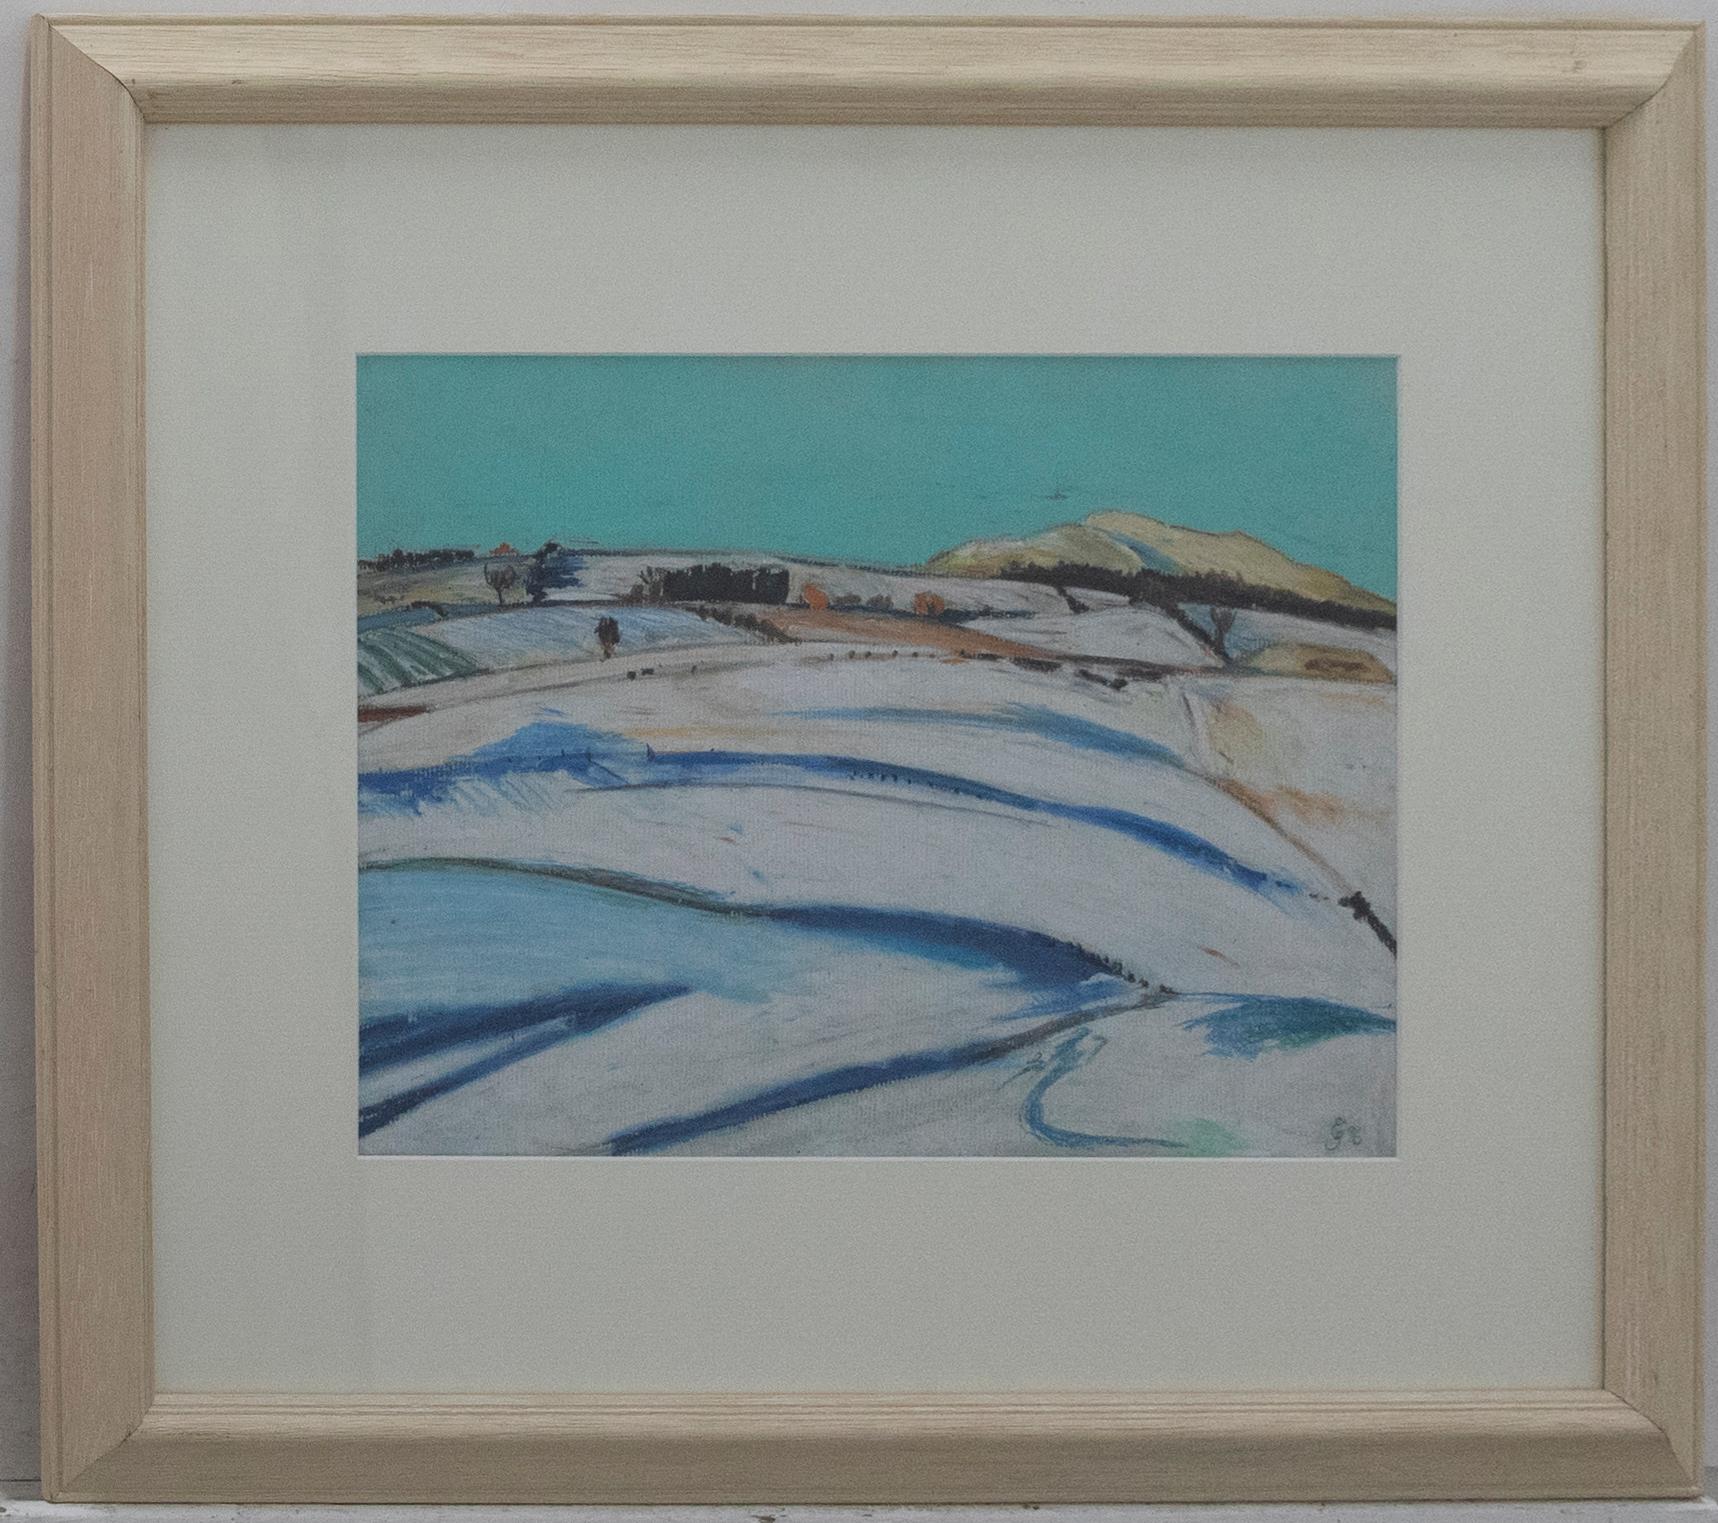 A modern British landscape depicting snow coveredfields on a clear winter's day. Presented in a complimenting contemporary frame with a crisp white mount. Signed with initials and dated '96 to lower right. On laid.